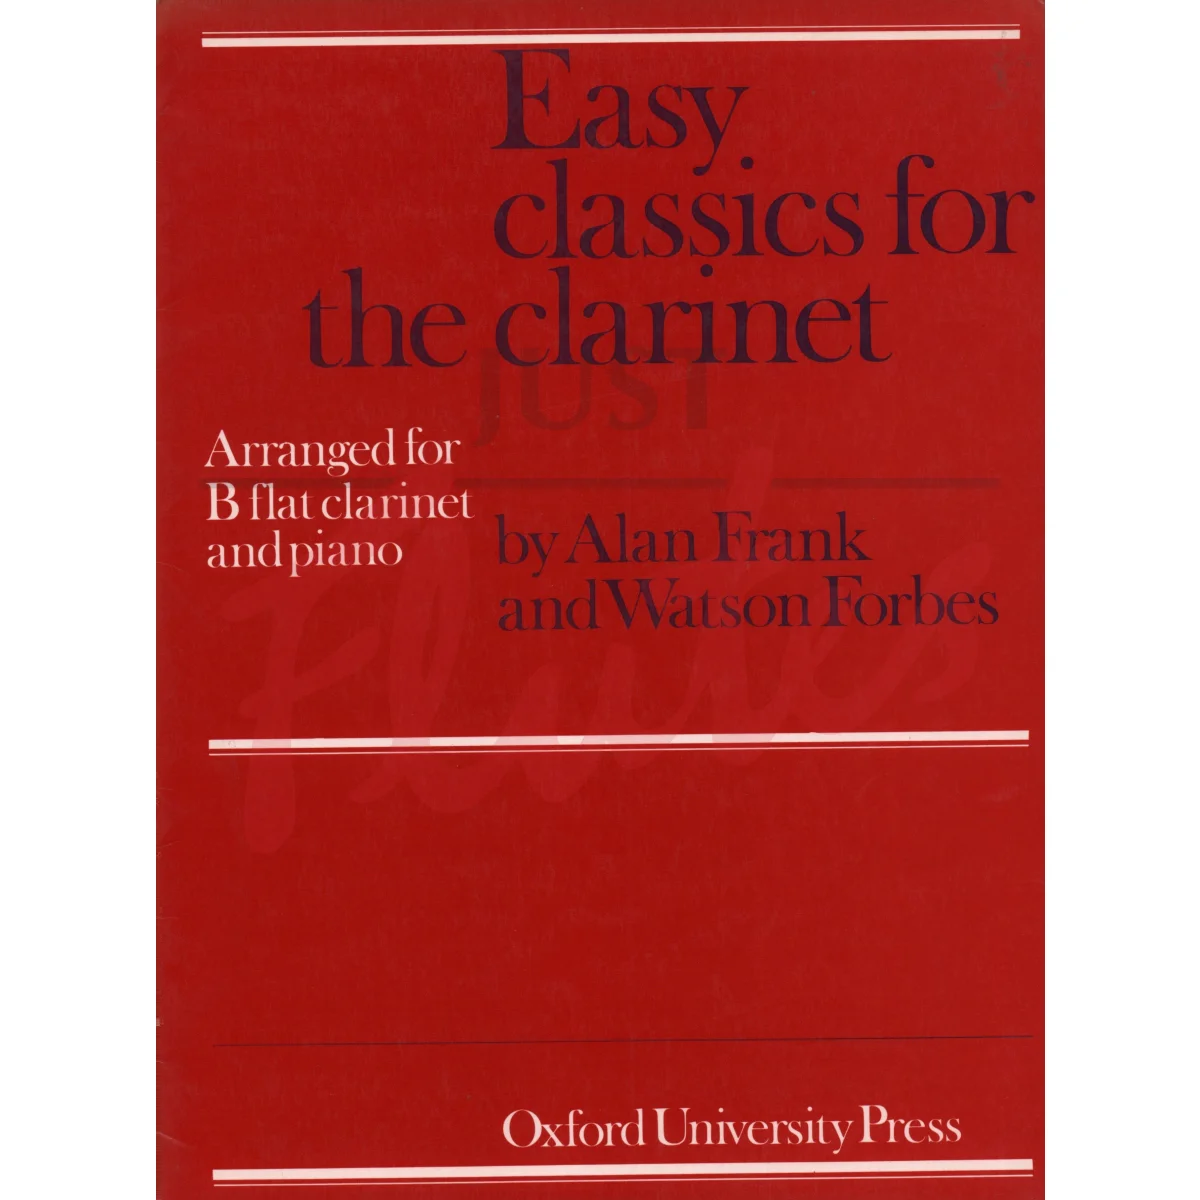 Easy Classics for the Clarinet